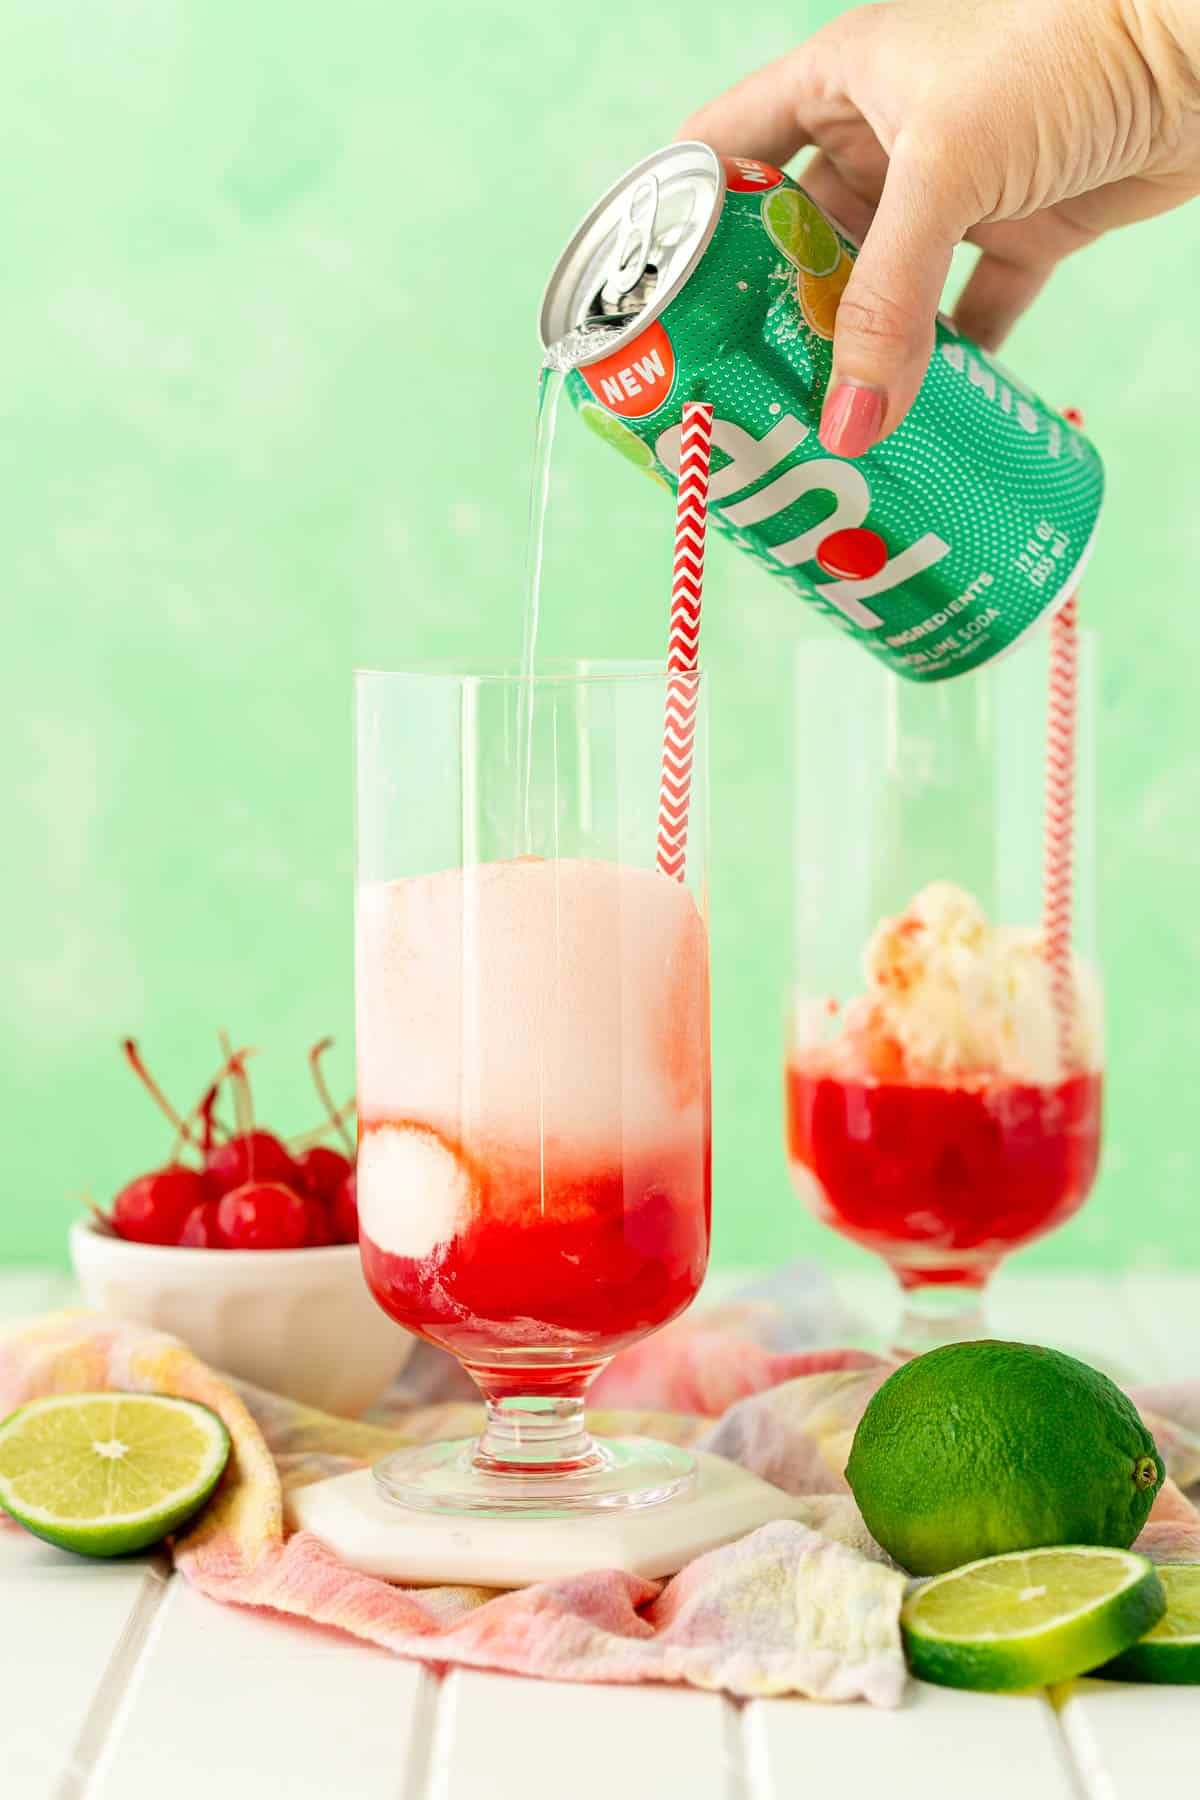 A can of 7Up being poured into a glass with vanilla ice cream and grenadine syrup.